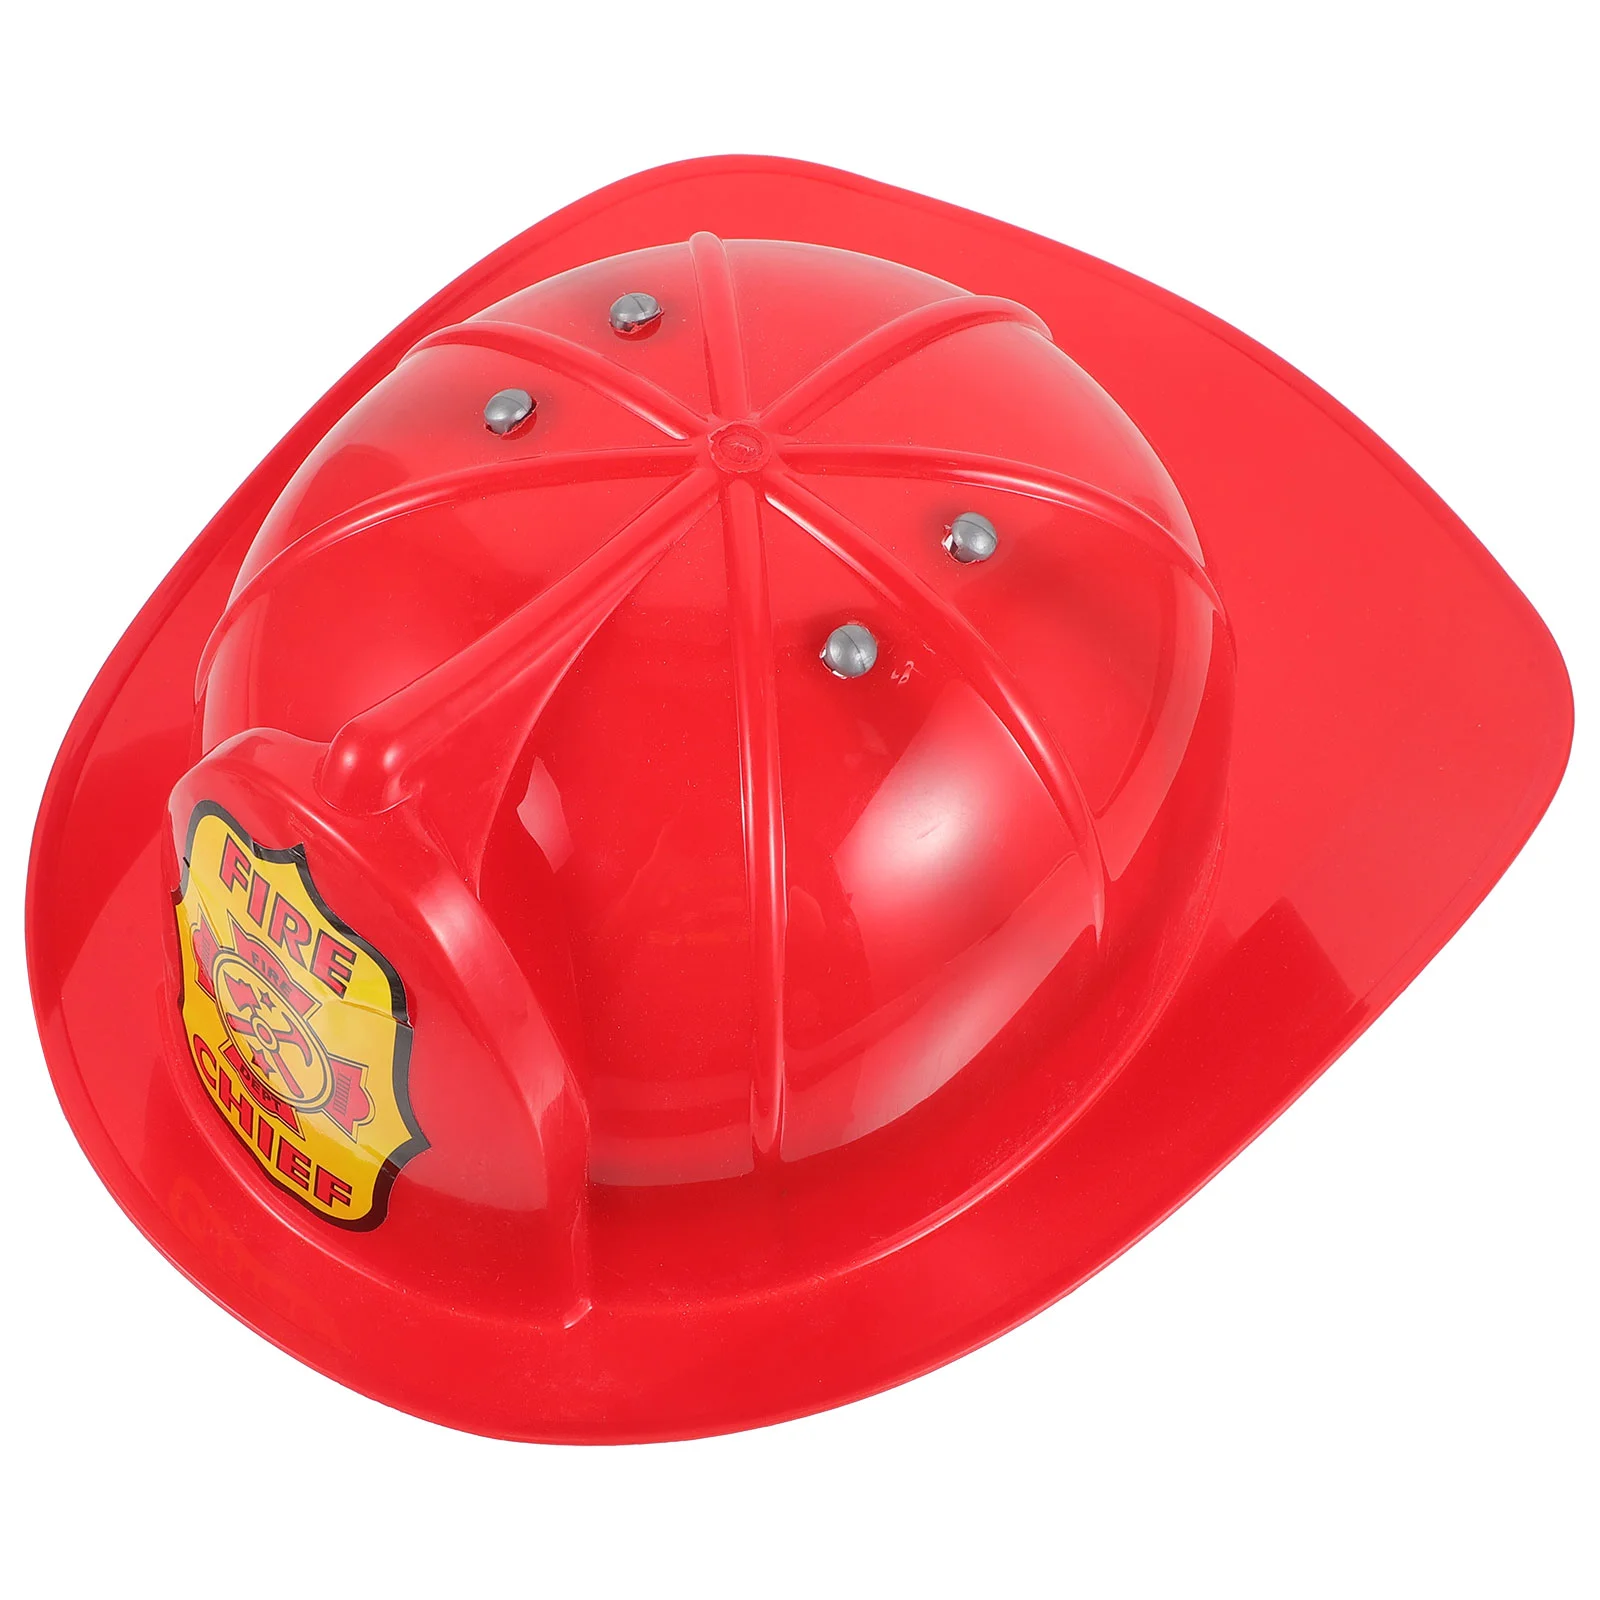 

Playset Accessories Fireman Costume Prop Make Hat Plastic Firefighter Boys Party Favors Kids Toys Child